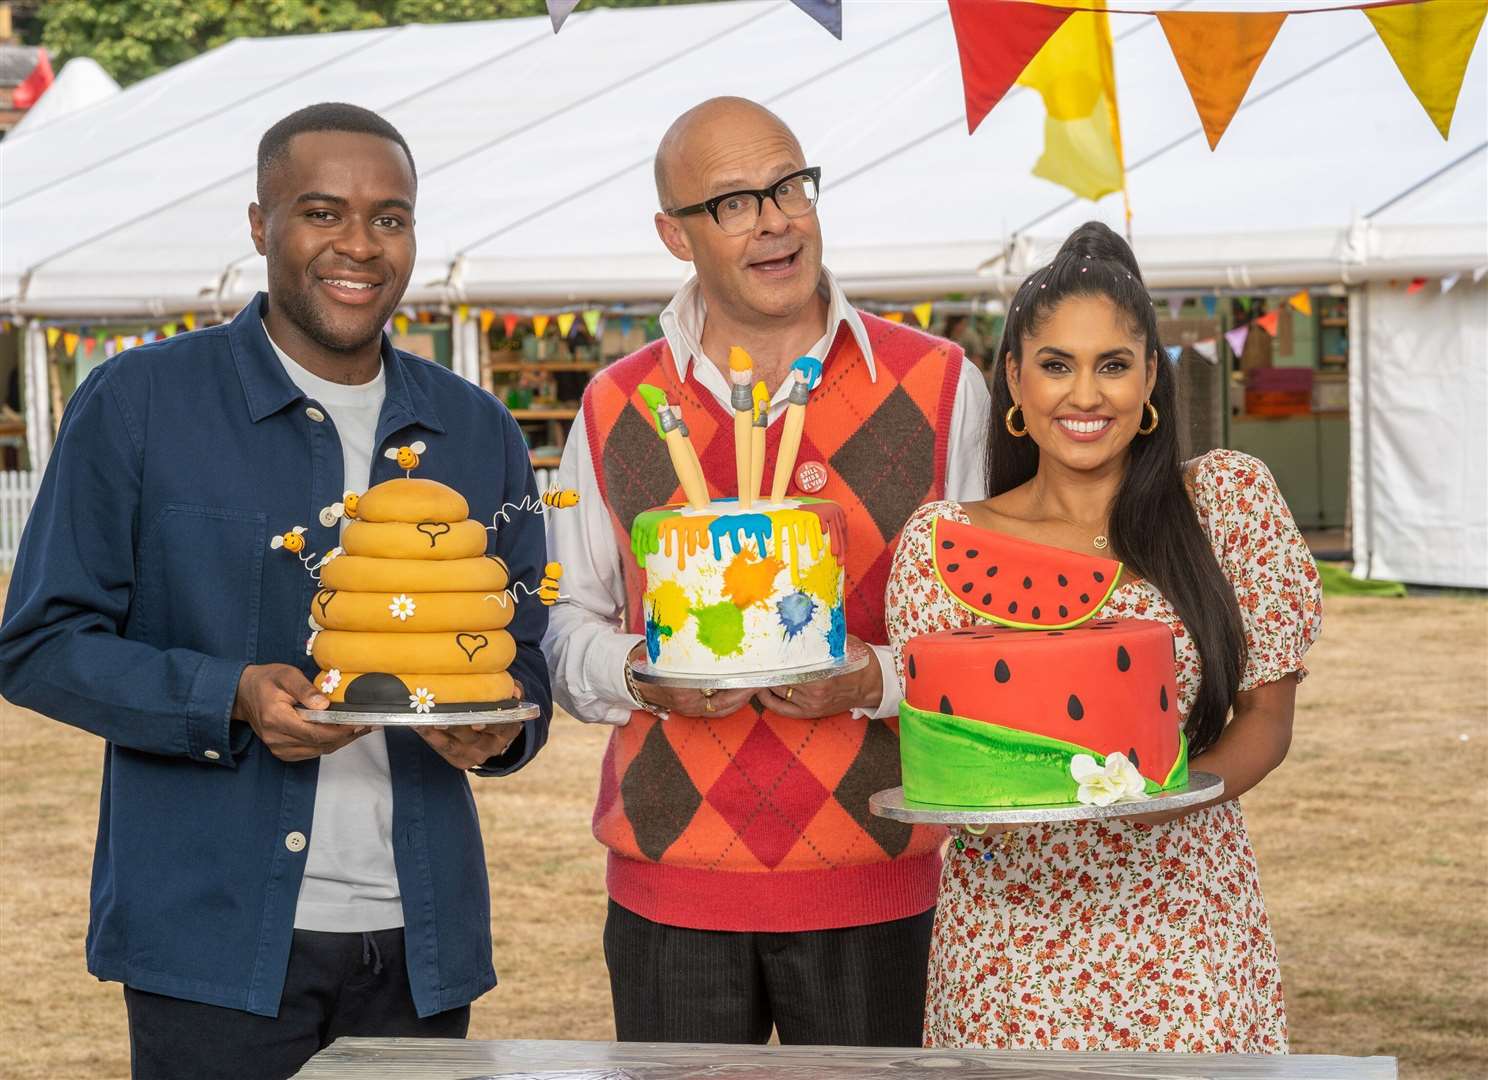 Junior Bake Off is back! Picture: Channel 4